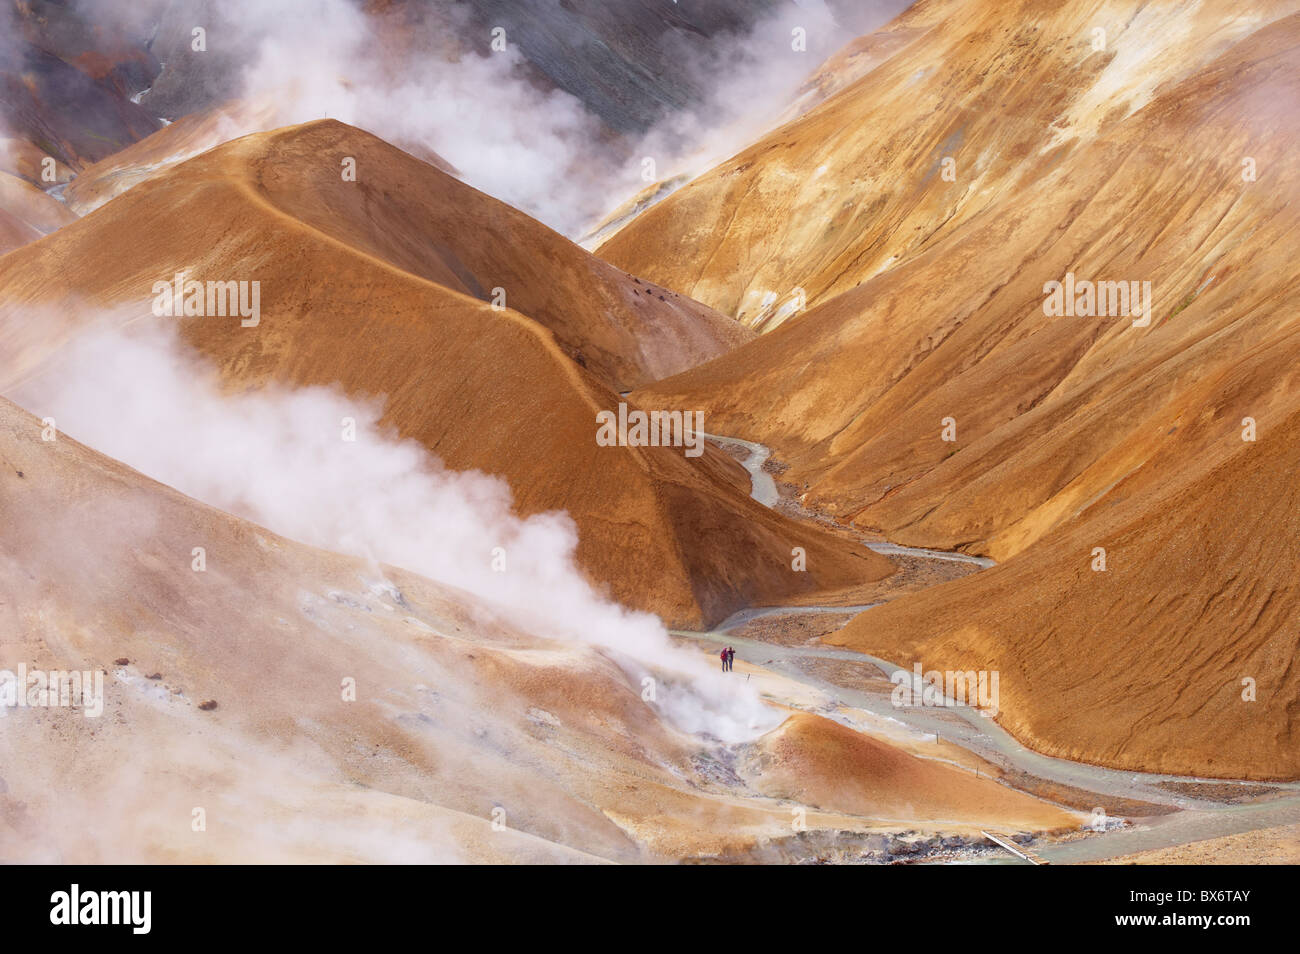 Hikers exploring the very active hot spring area at Kerlingarfjoll, Iceland Stock Photo